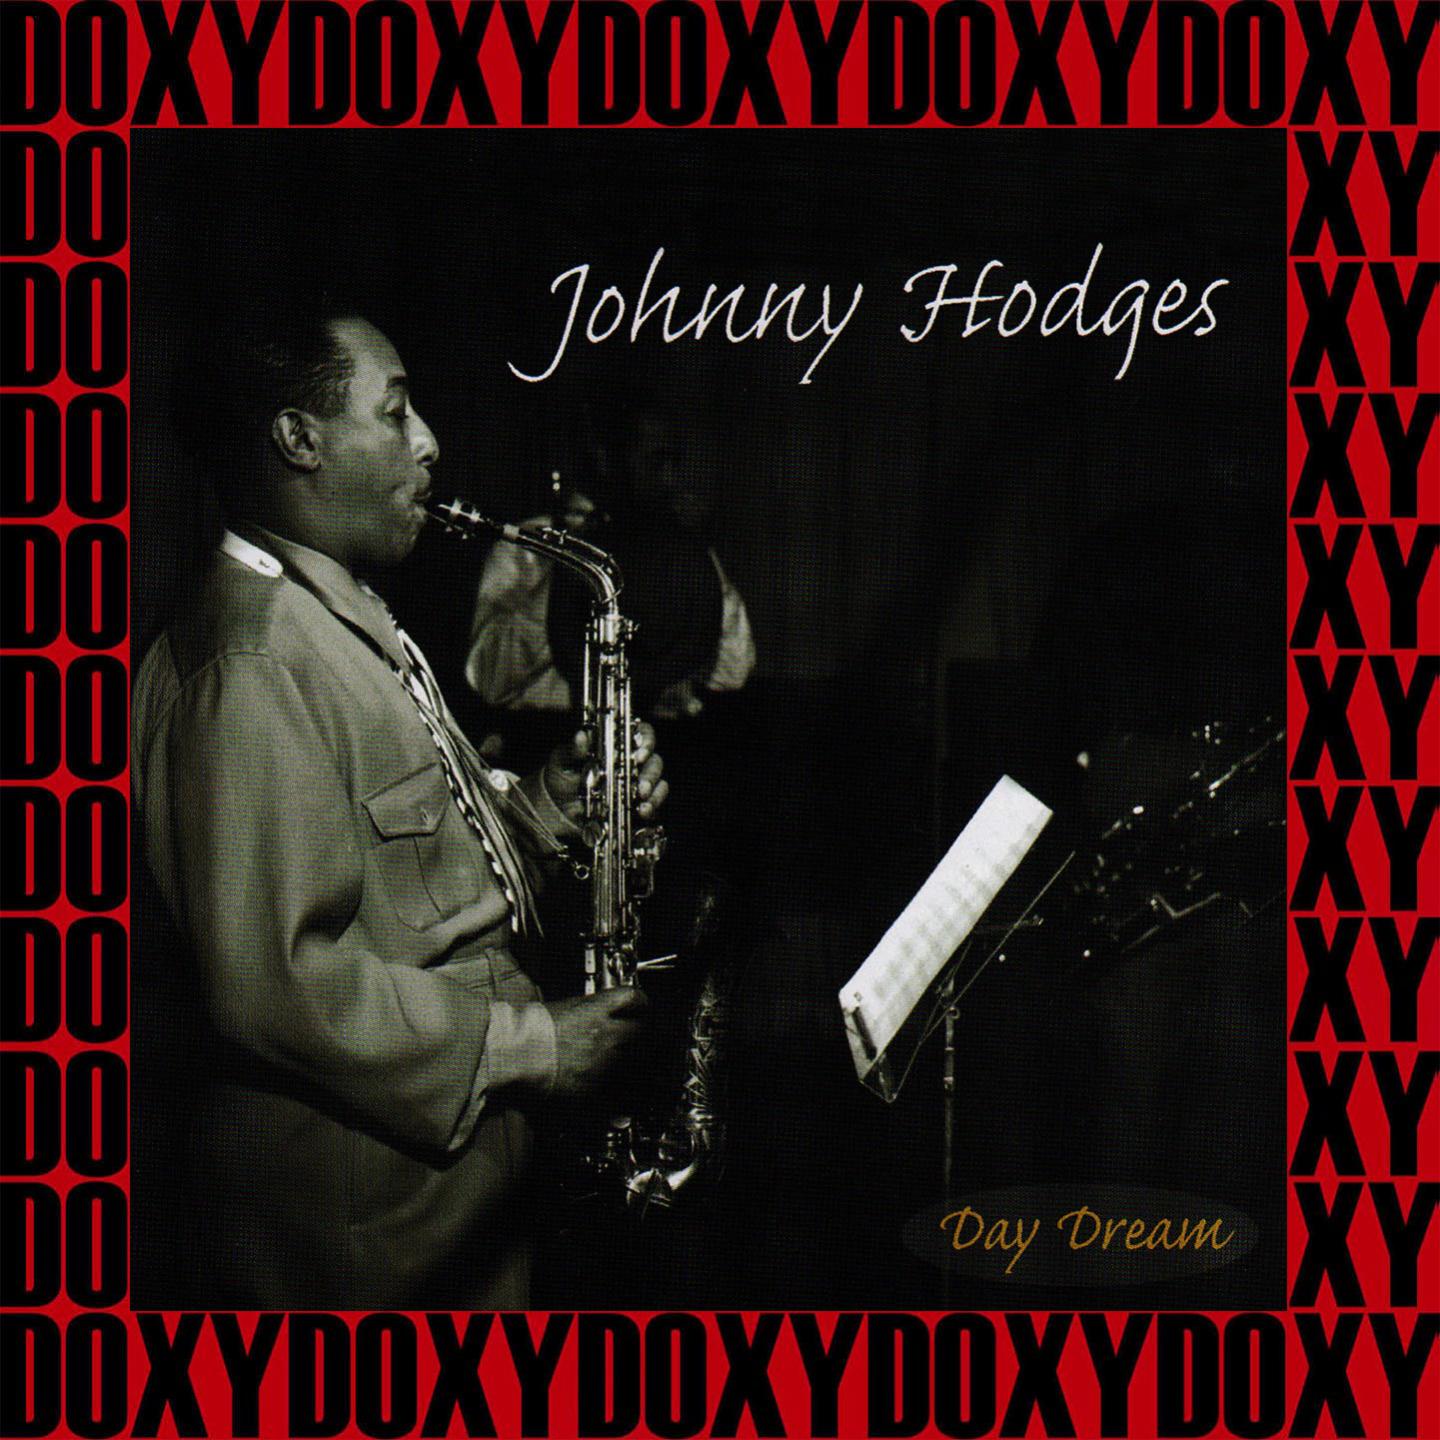 Johnny Hodges - Day Dream, 1938-1947 (Remastered Version) (Doxy Collection)